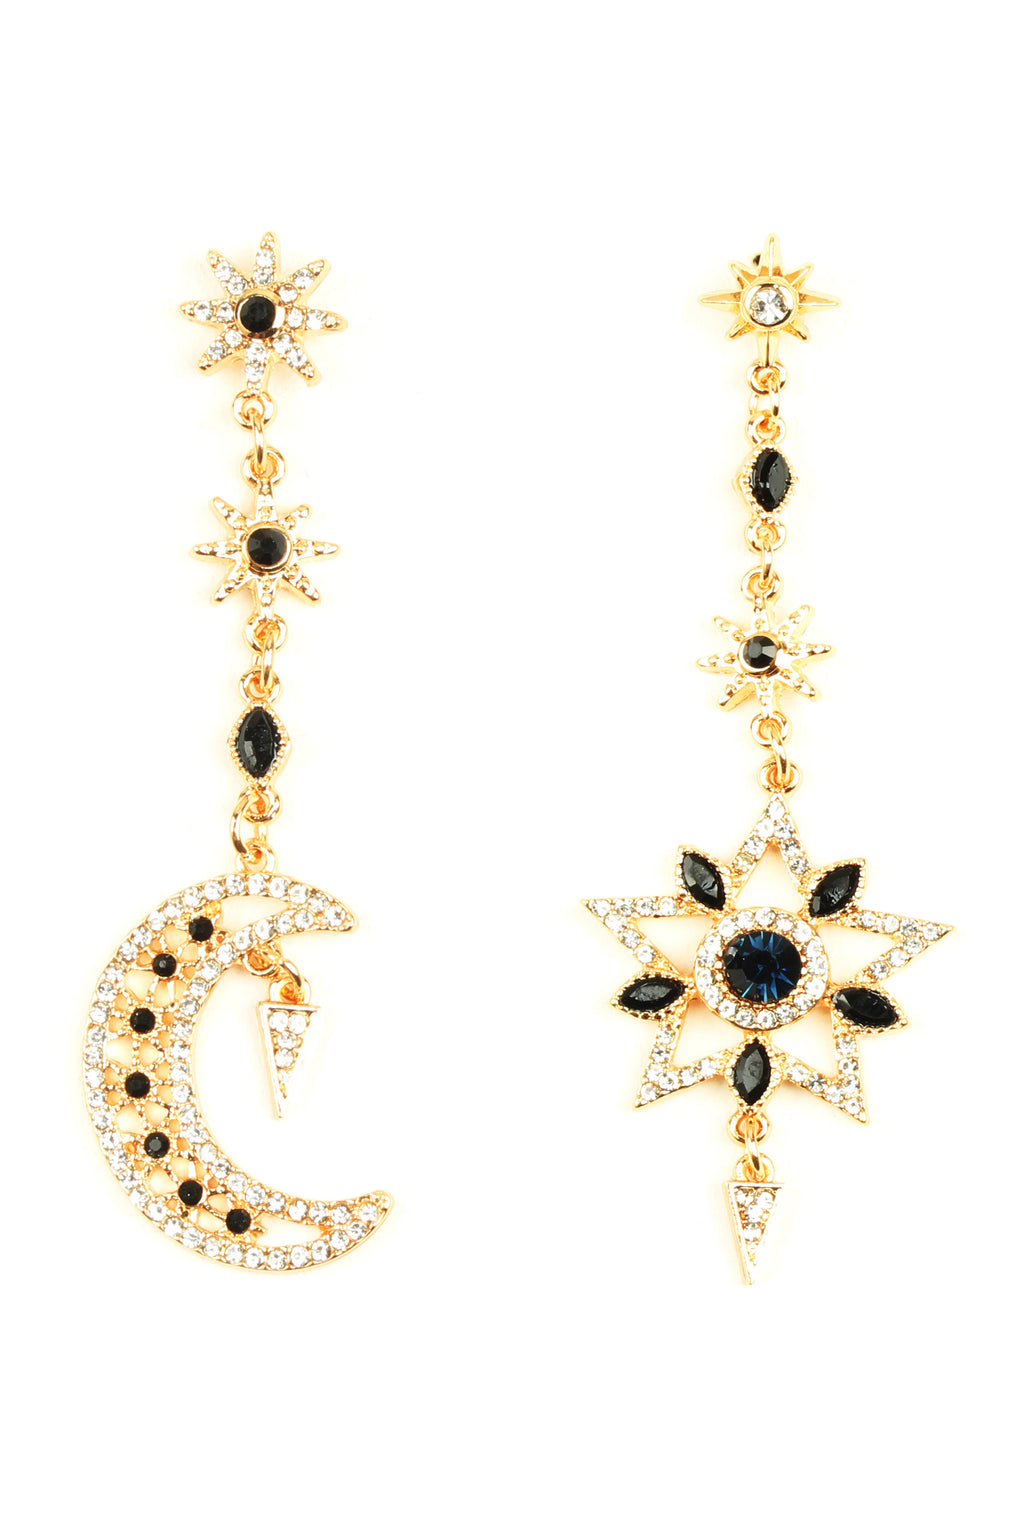 Gold alloy star and moon earrings studded with glass crystals.